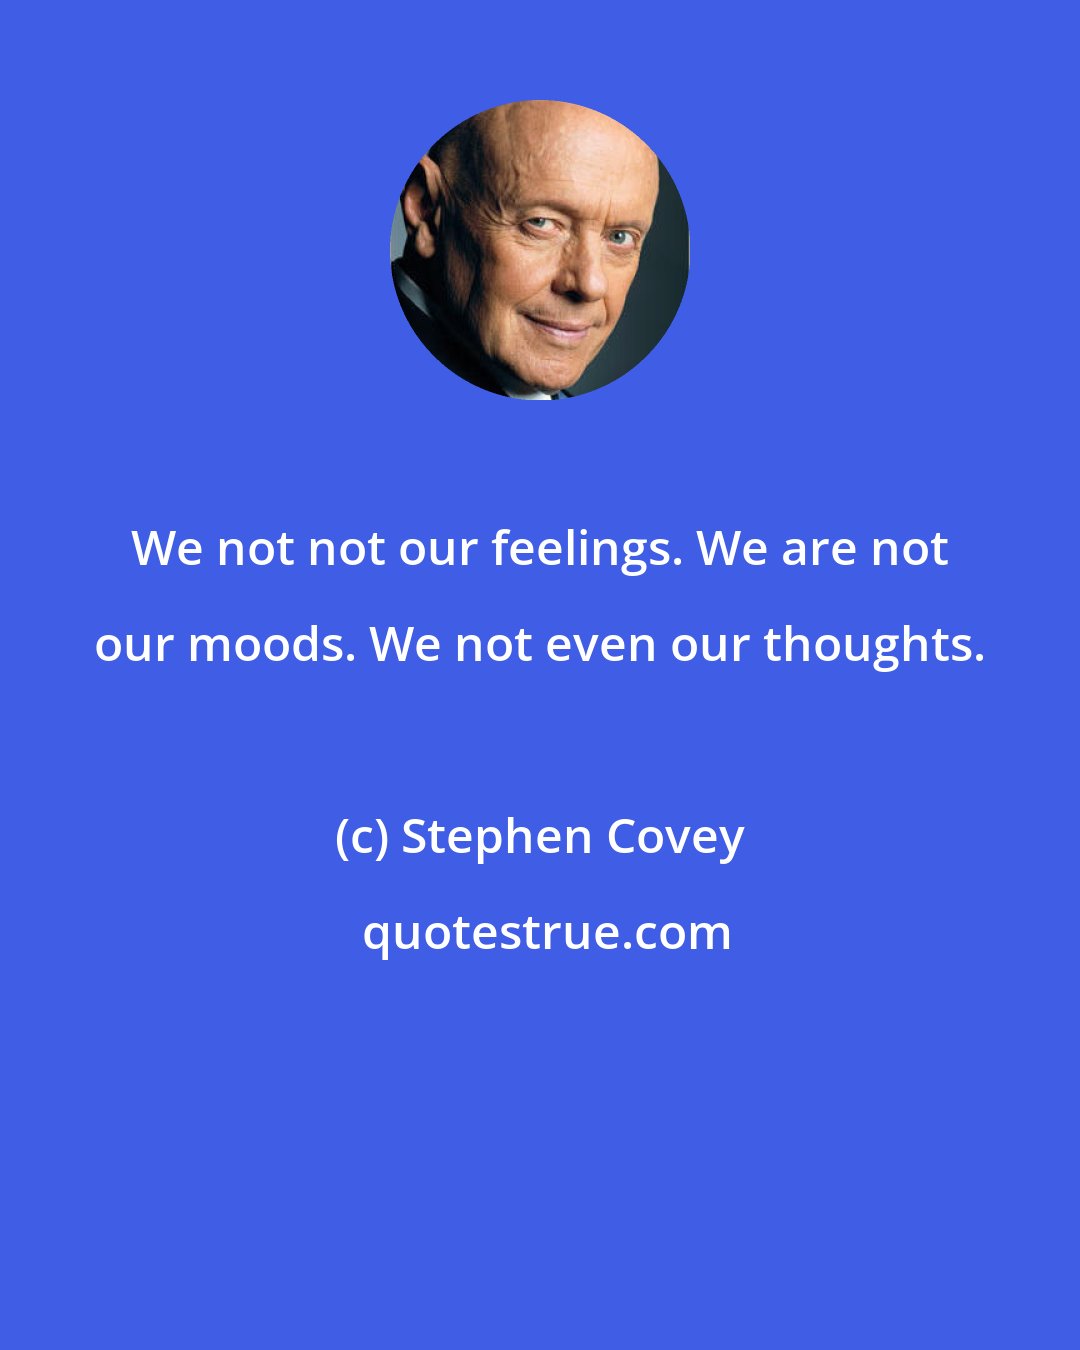 Stephen Covey: We not not our feelings. We are not our moods. We not even our thoughts.